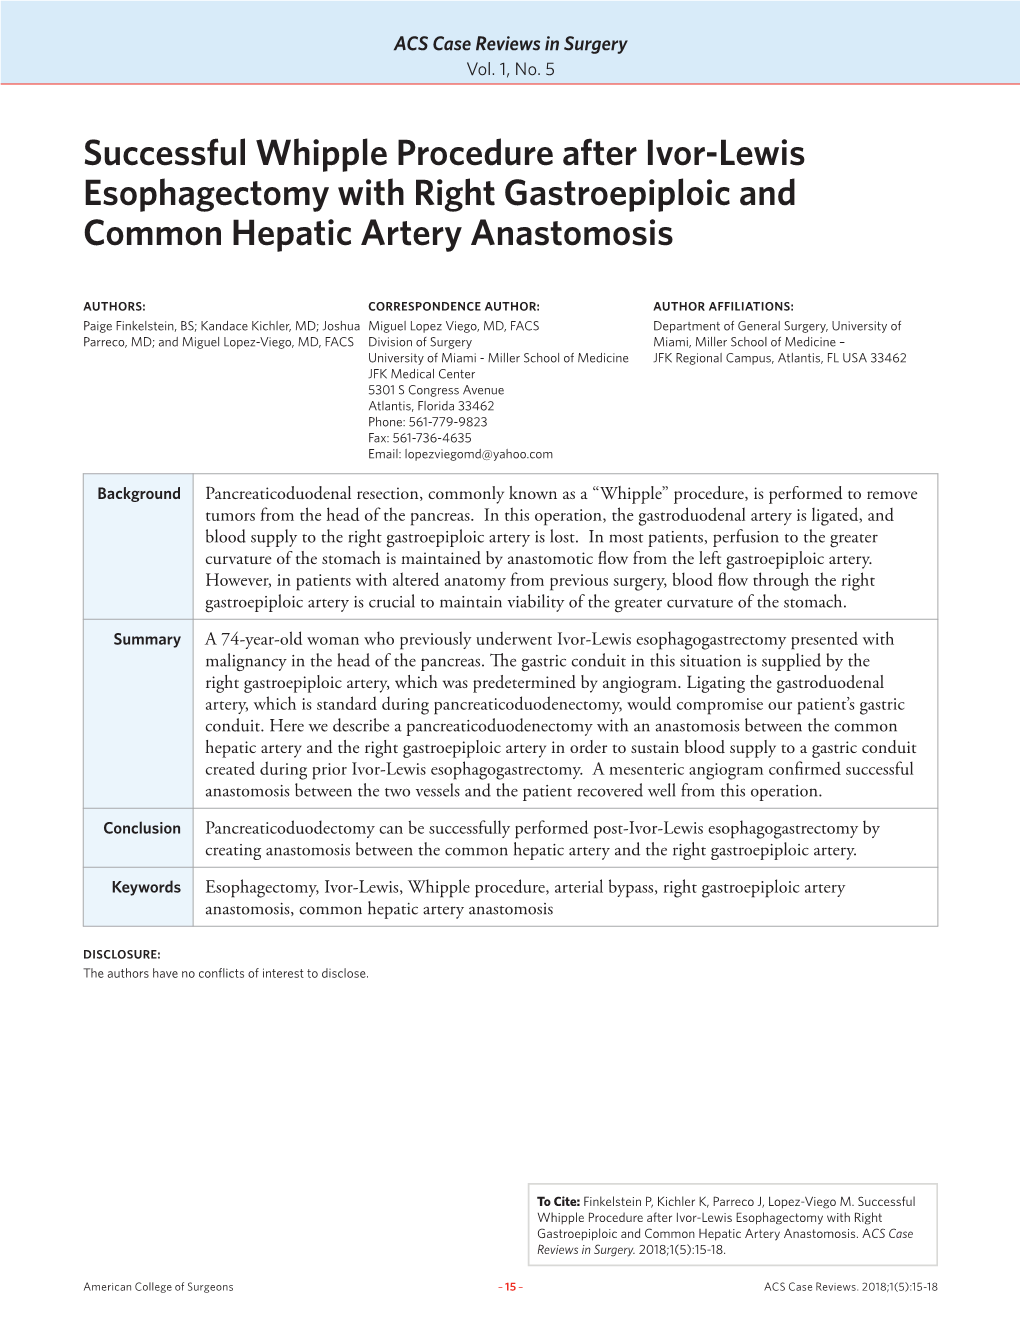 Successful Whipple Procedure After Ivor-Lewis Esophagectomy with Right Gastroepiploic and Common Hepatic Artery Anastomosis